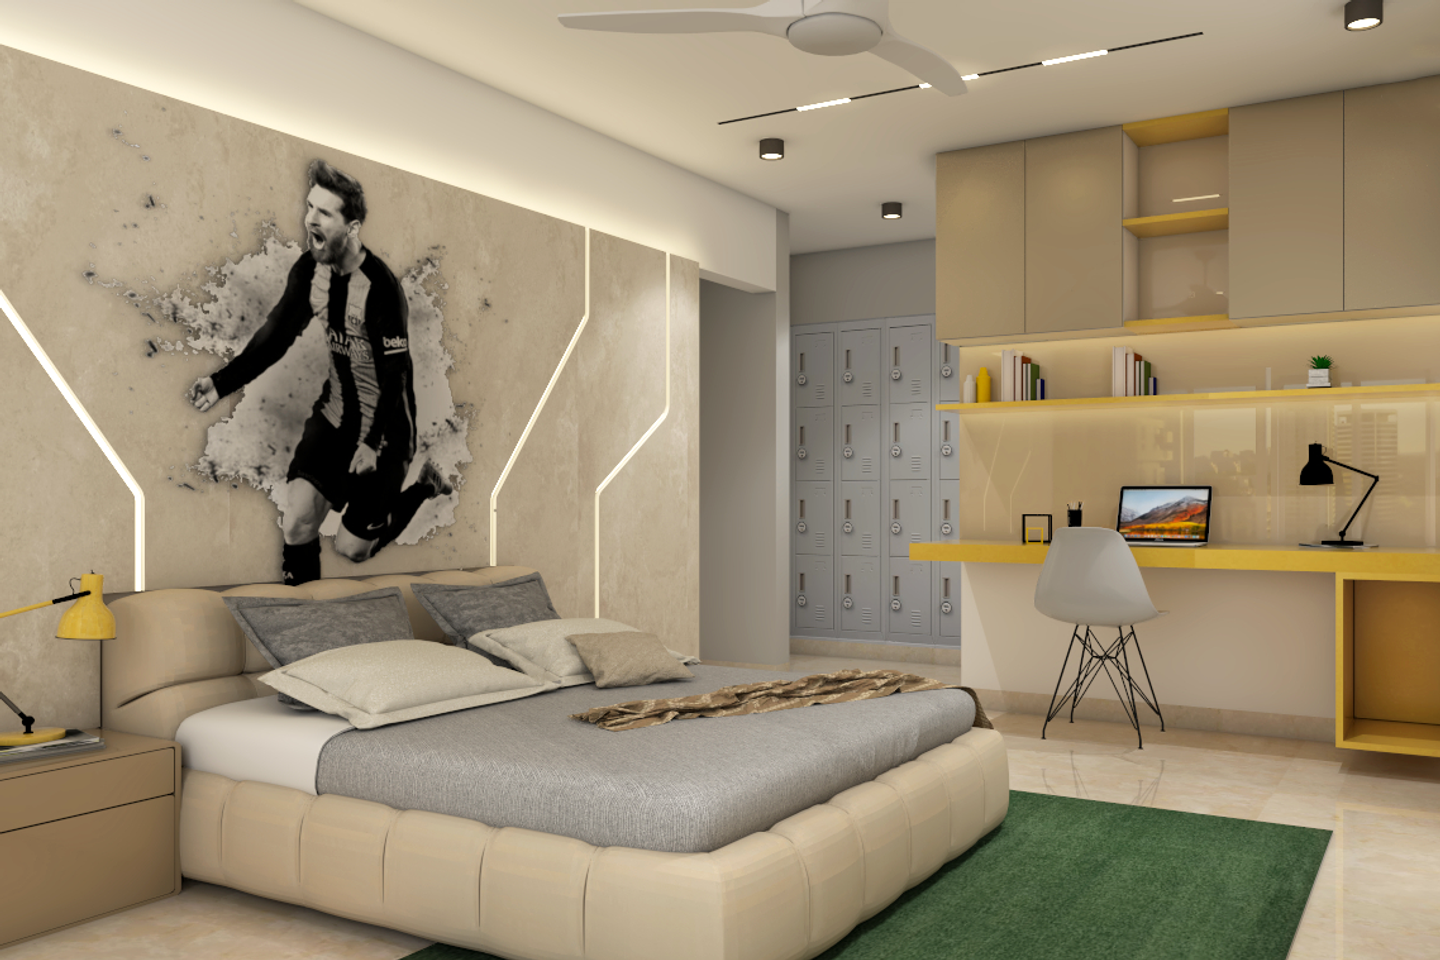 Classic Bedroom for Sports Lovers - Livspace